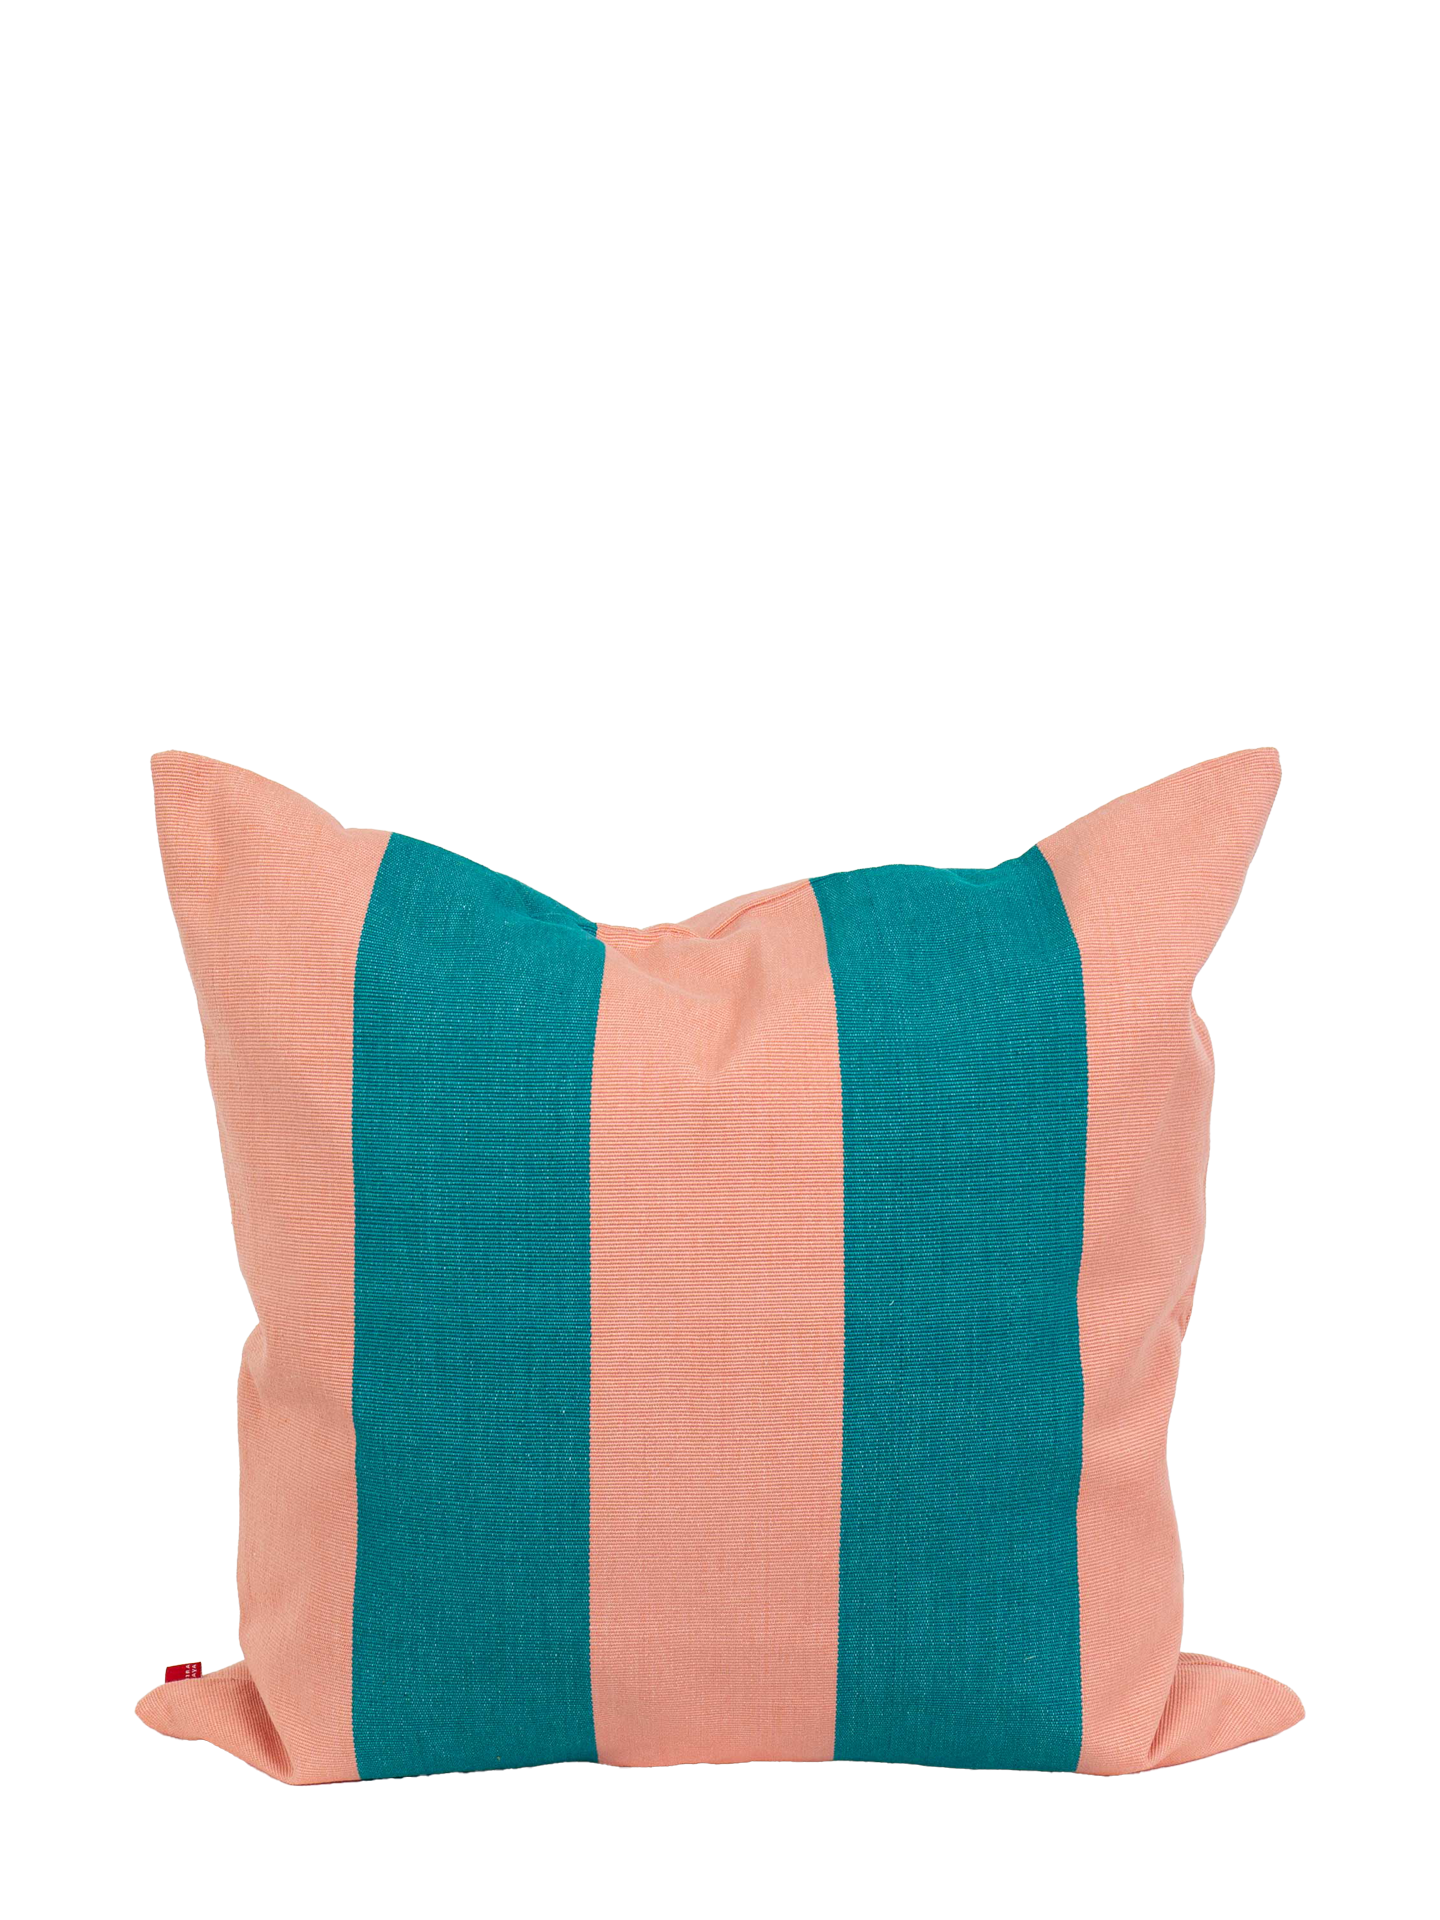 Fifi Cushion Cover (50x50cm), pink-turquoise